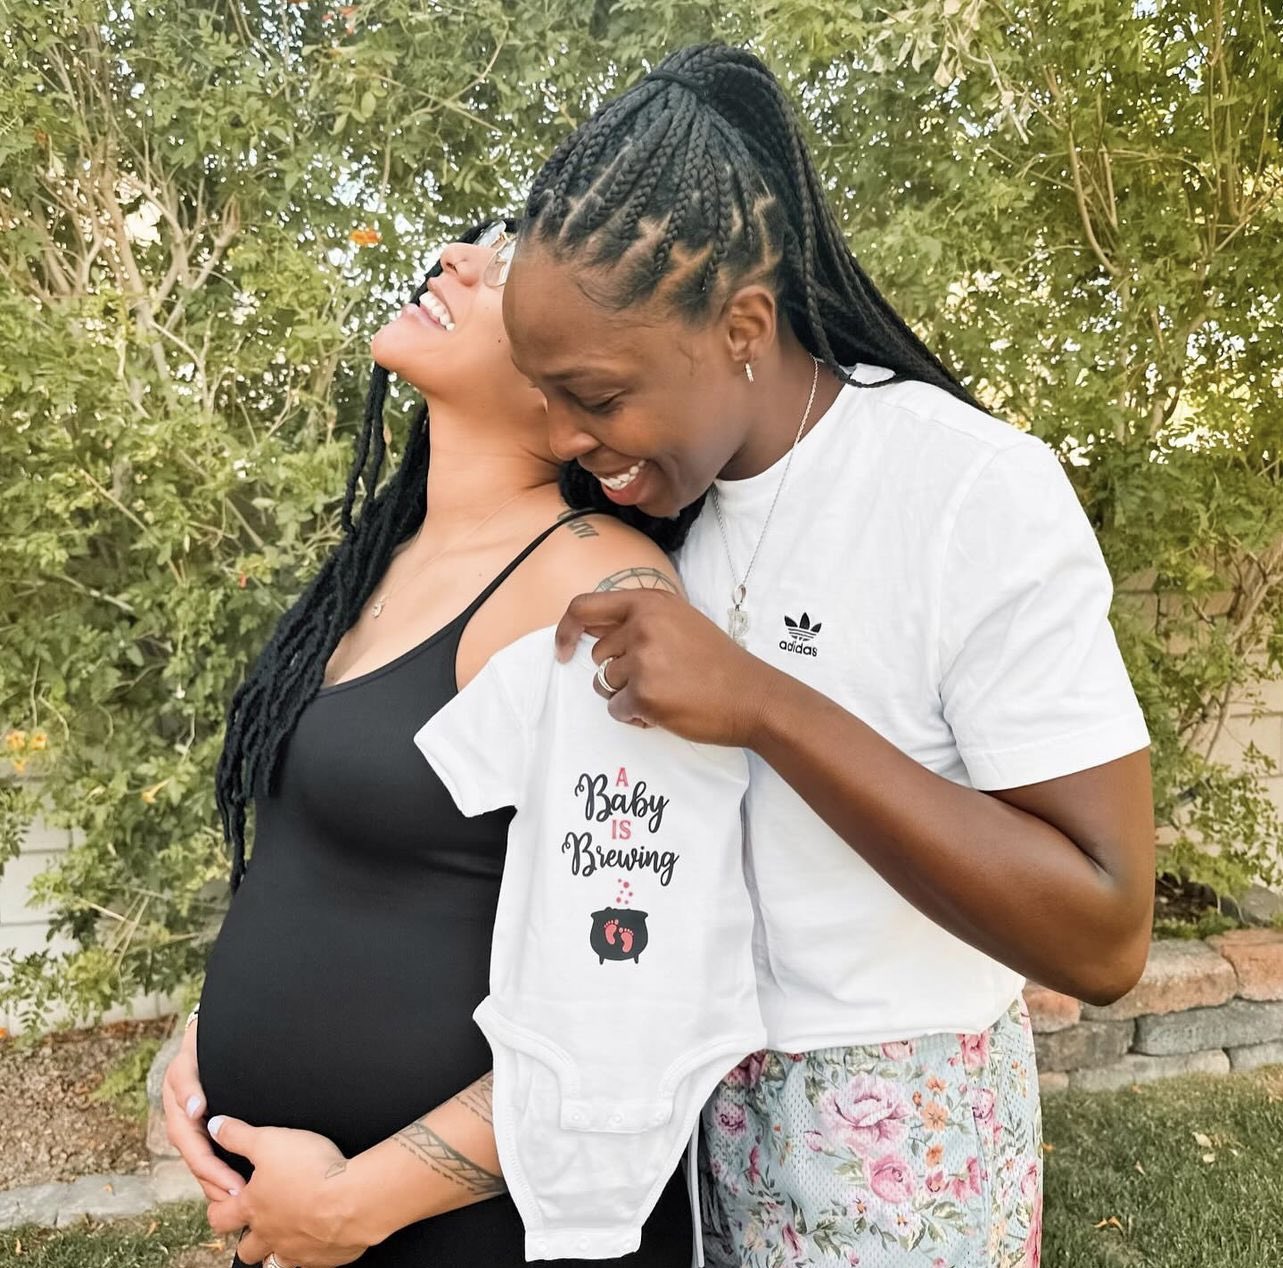 Basketball player poses with her pregnant wife.